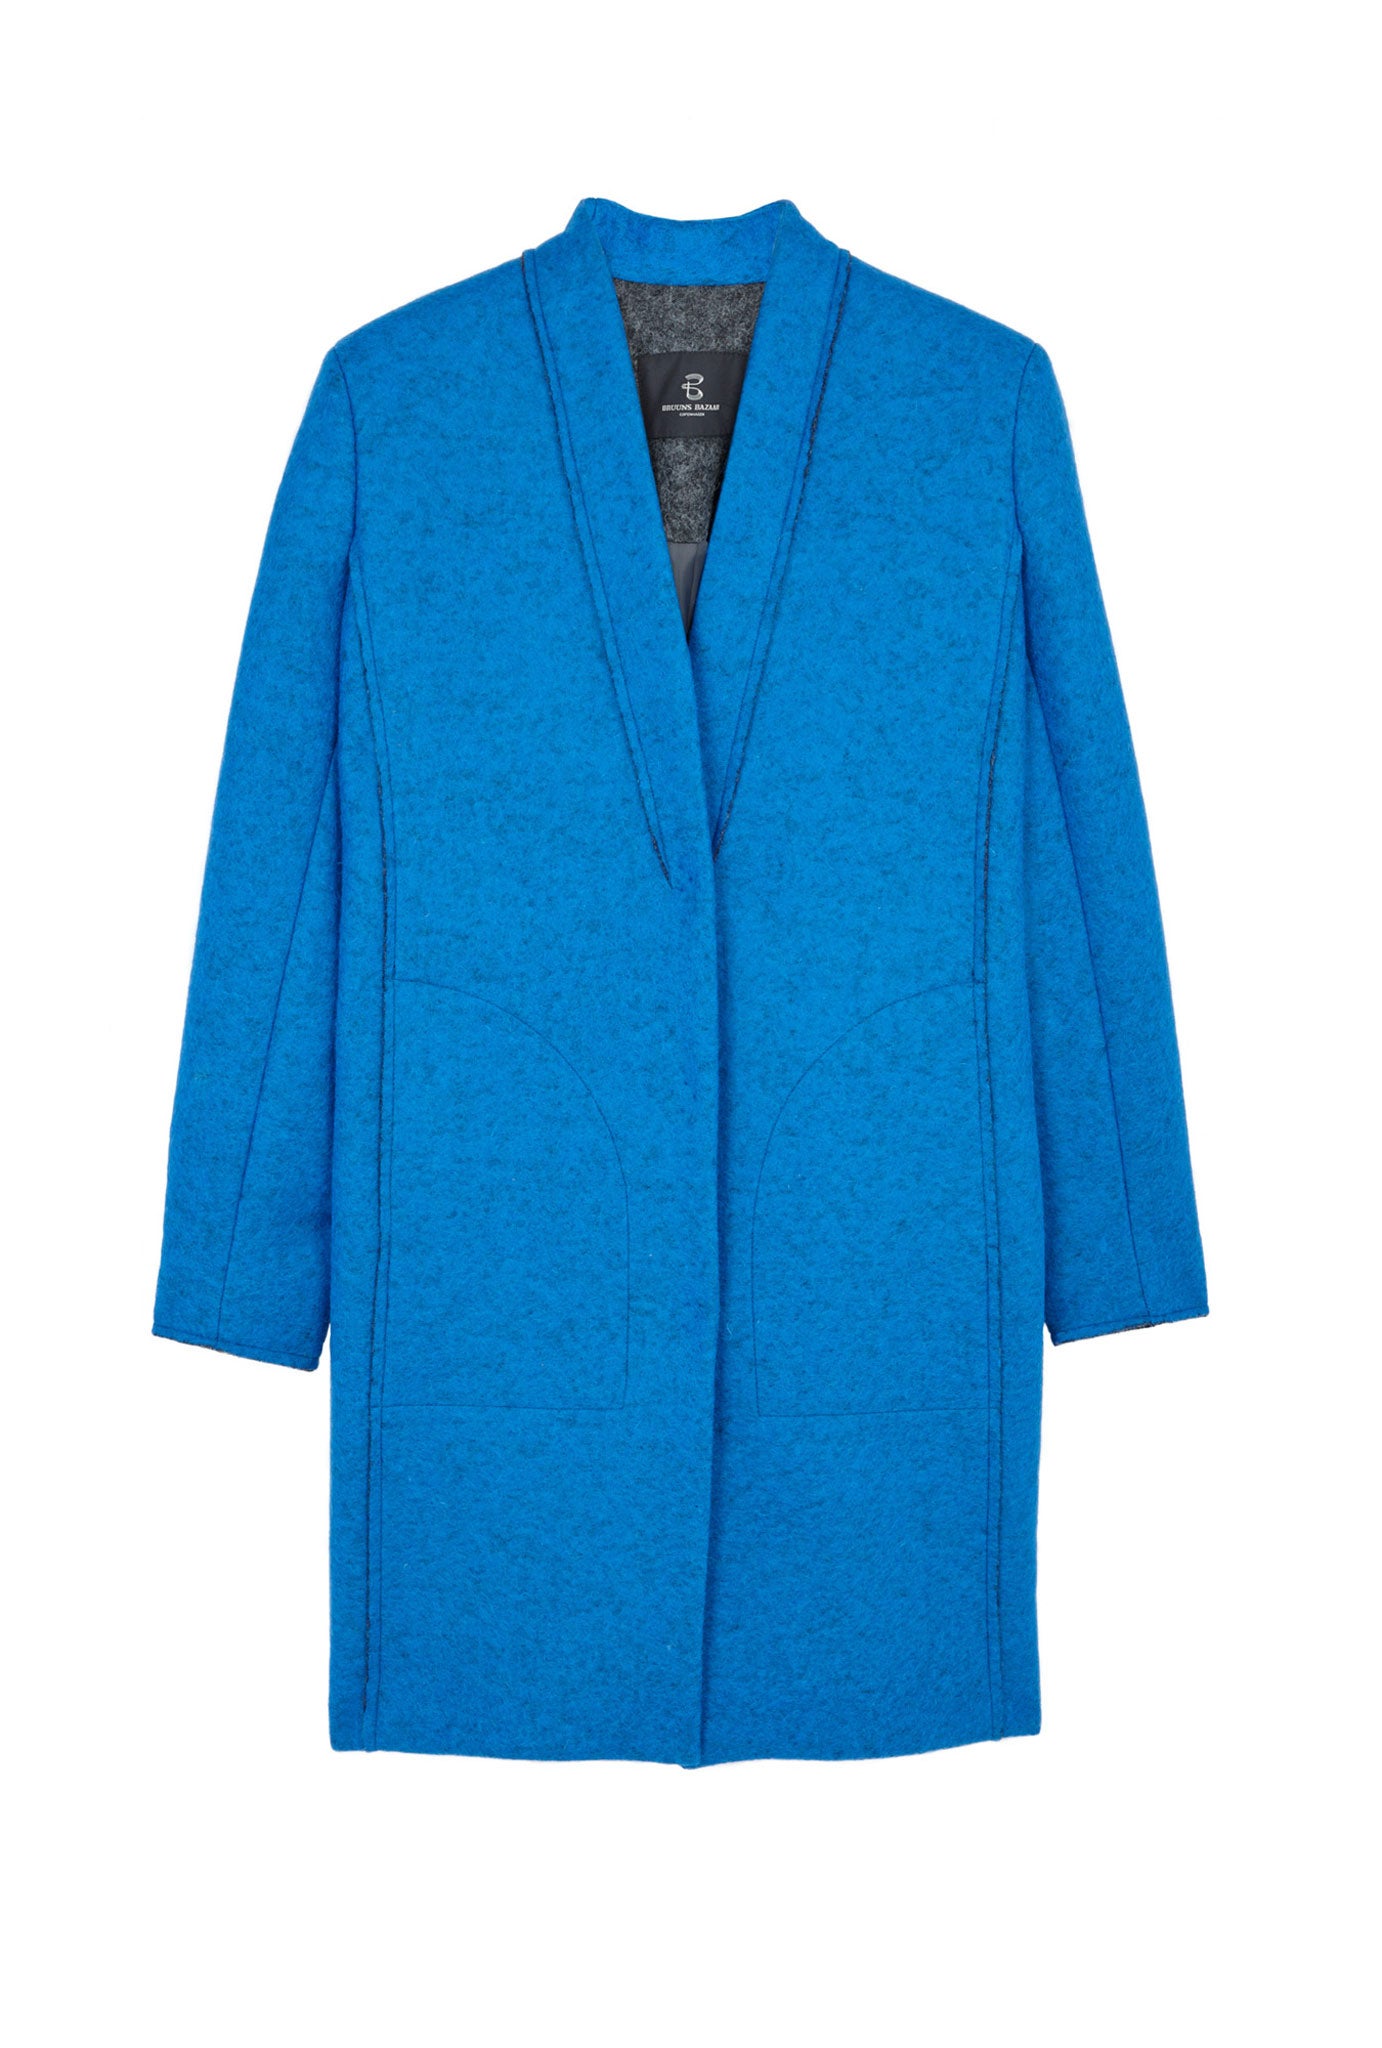 This electric-blue, single-breasted felted wool number from Bruuns Bazaar is beautiful, bold and not bad value to boot